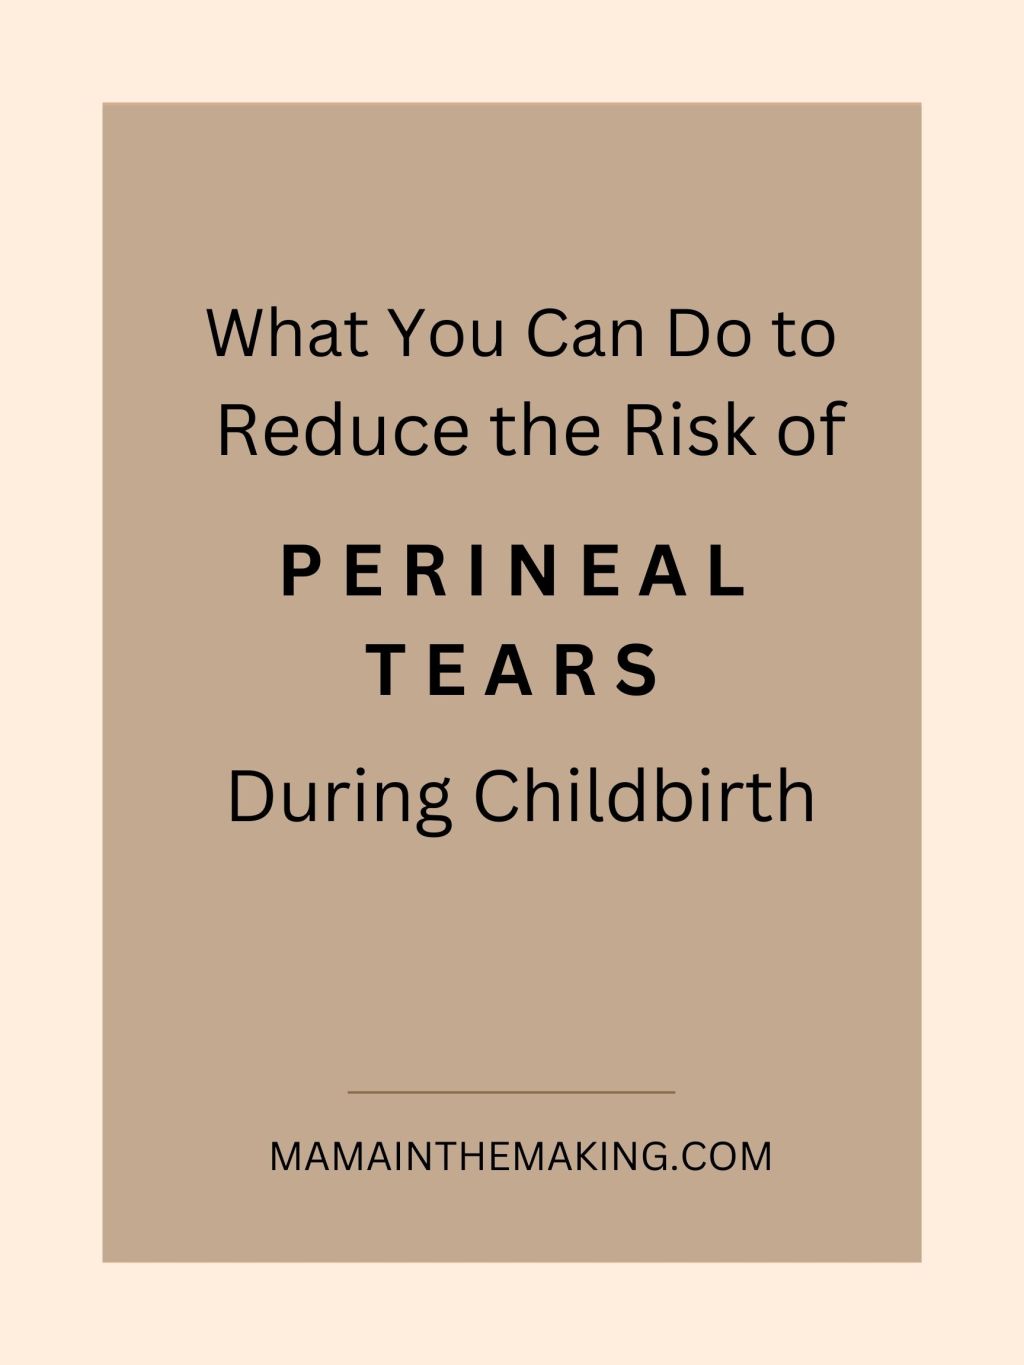 What You Can Do To Reduce the Risk of Perineal Tears During Childbirth